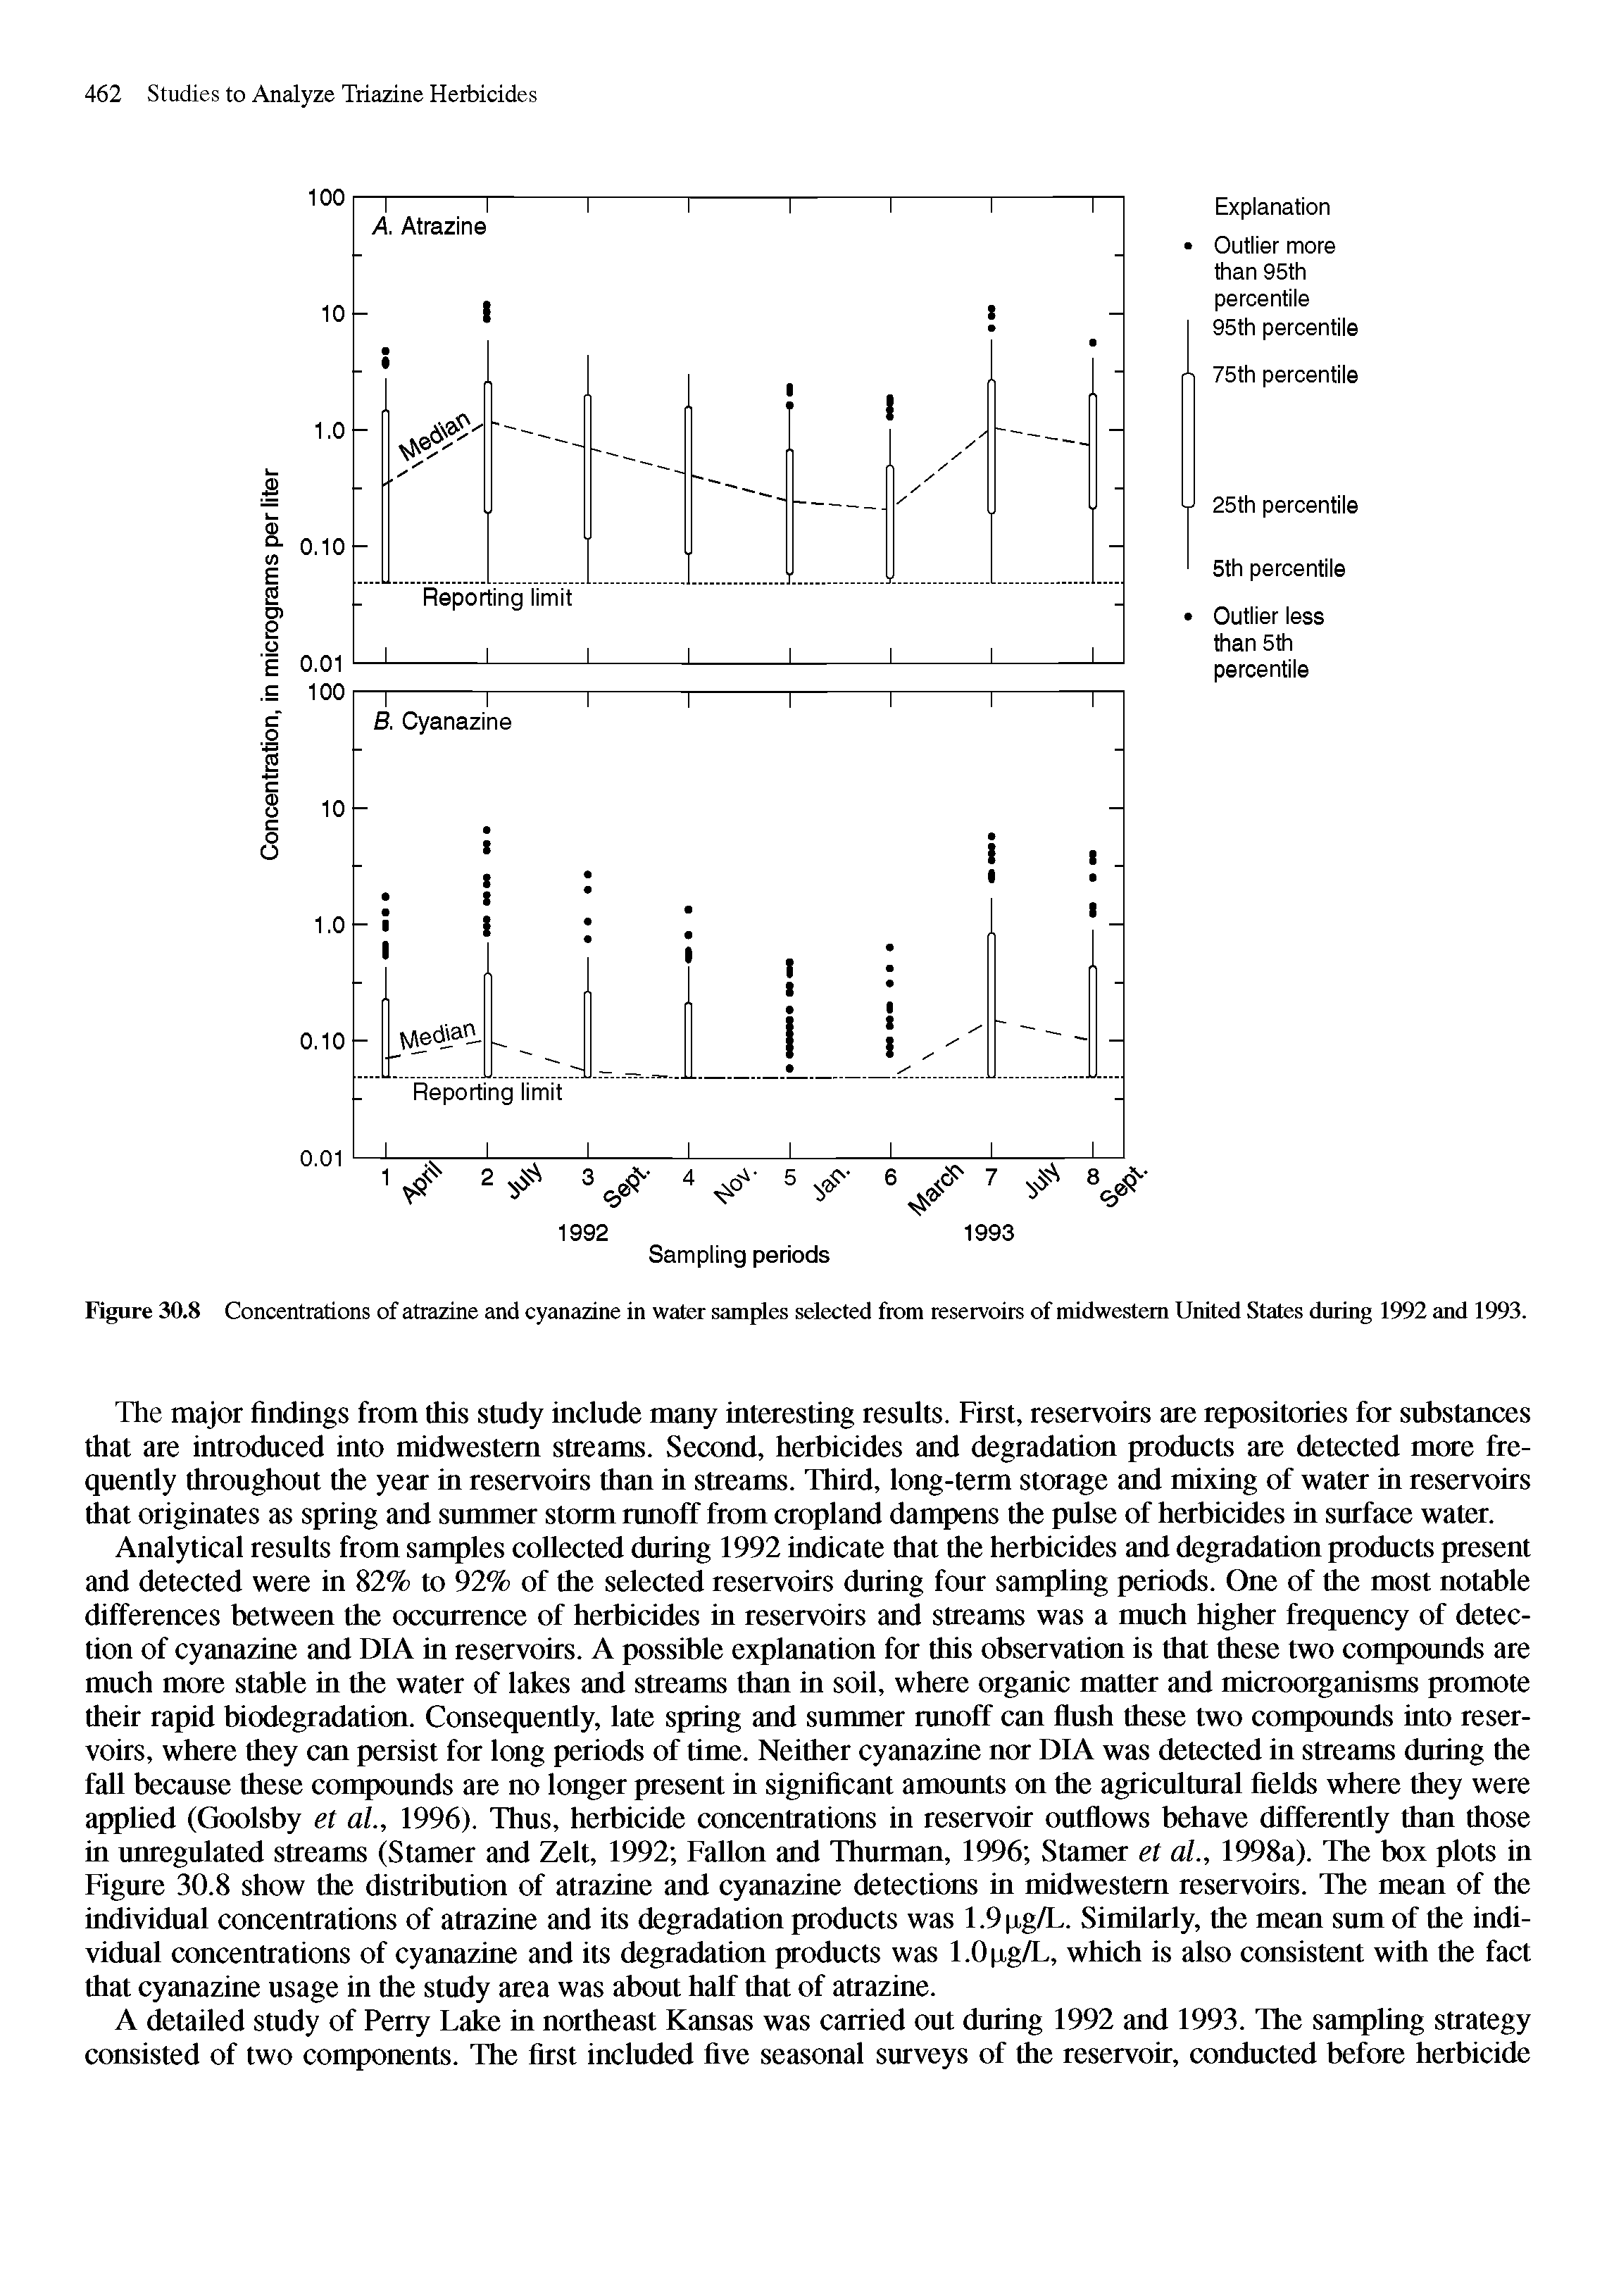 Figure 30.8 Concentrations of atrazine and cyanazine in water samples selected from reservoirs of midwestem United States during 1992 and 1993.